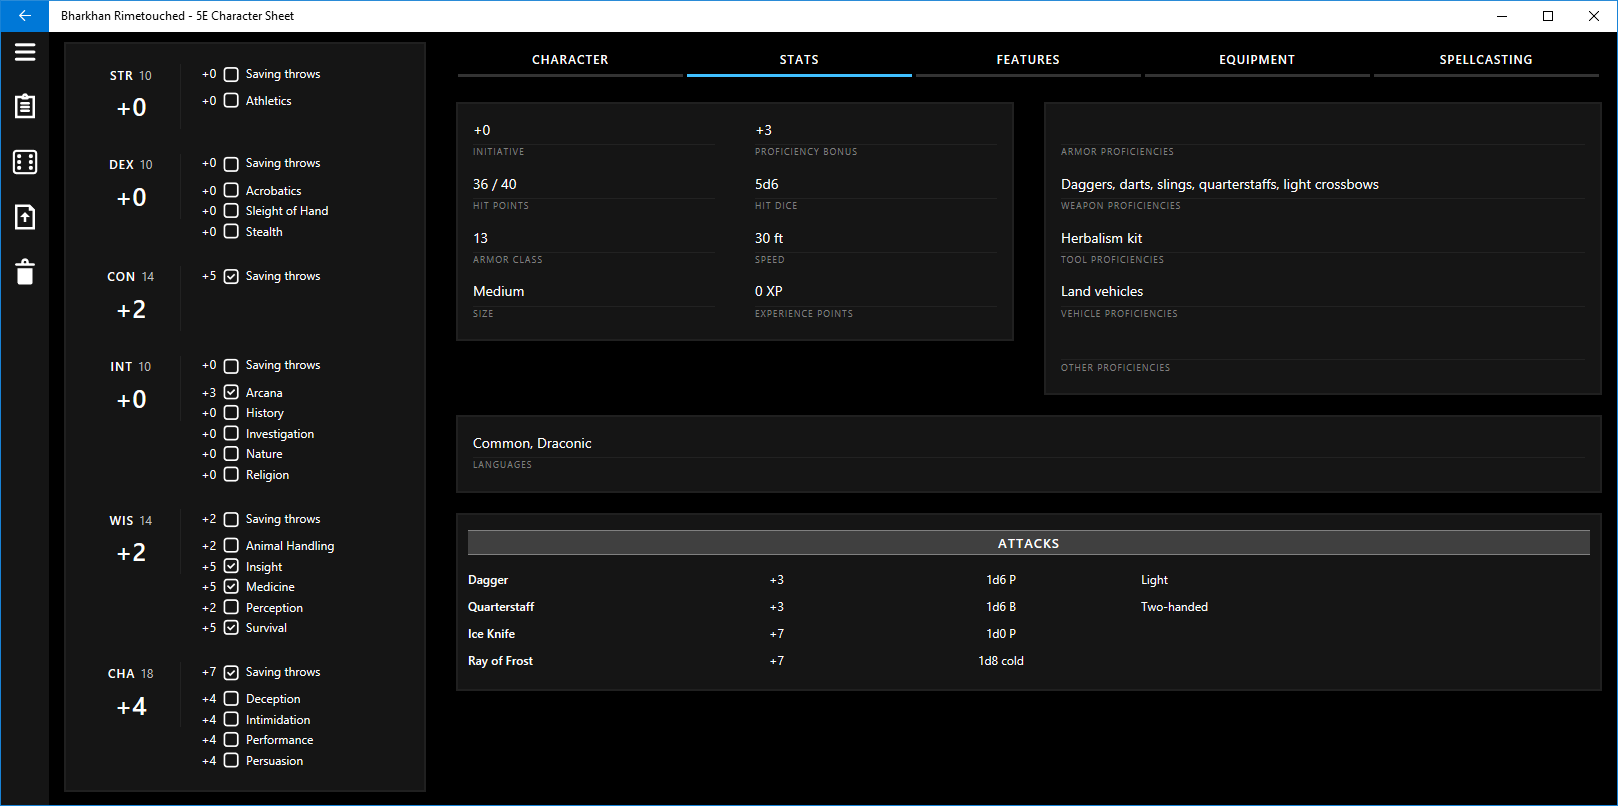 On the Stats page you can see your character's initiative bonus, hit points, proficiencies, languages, and attacks.